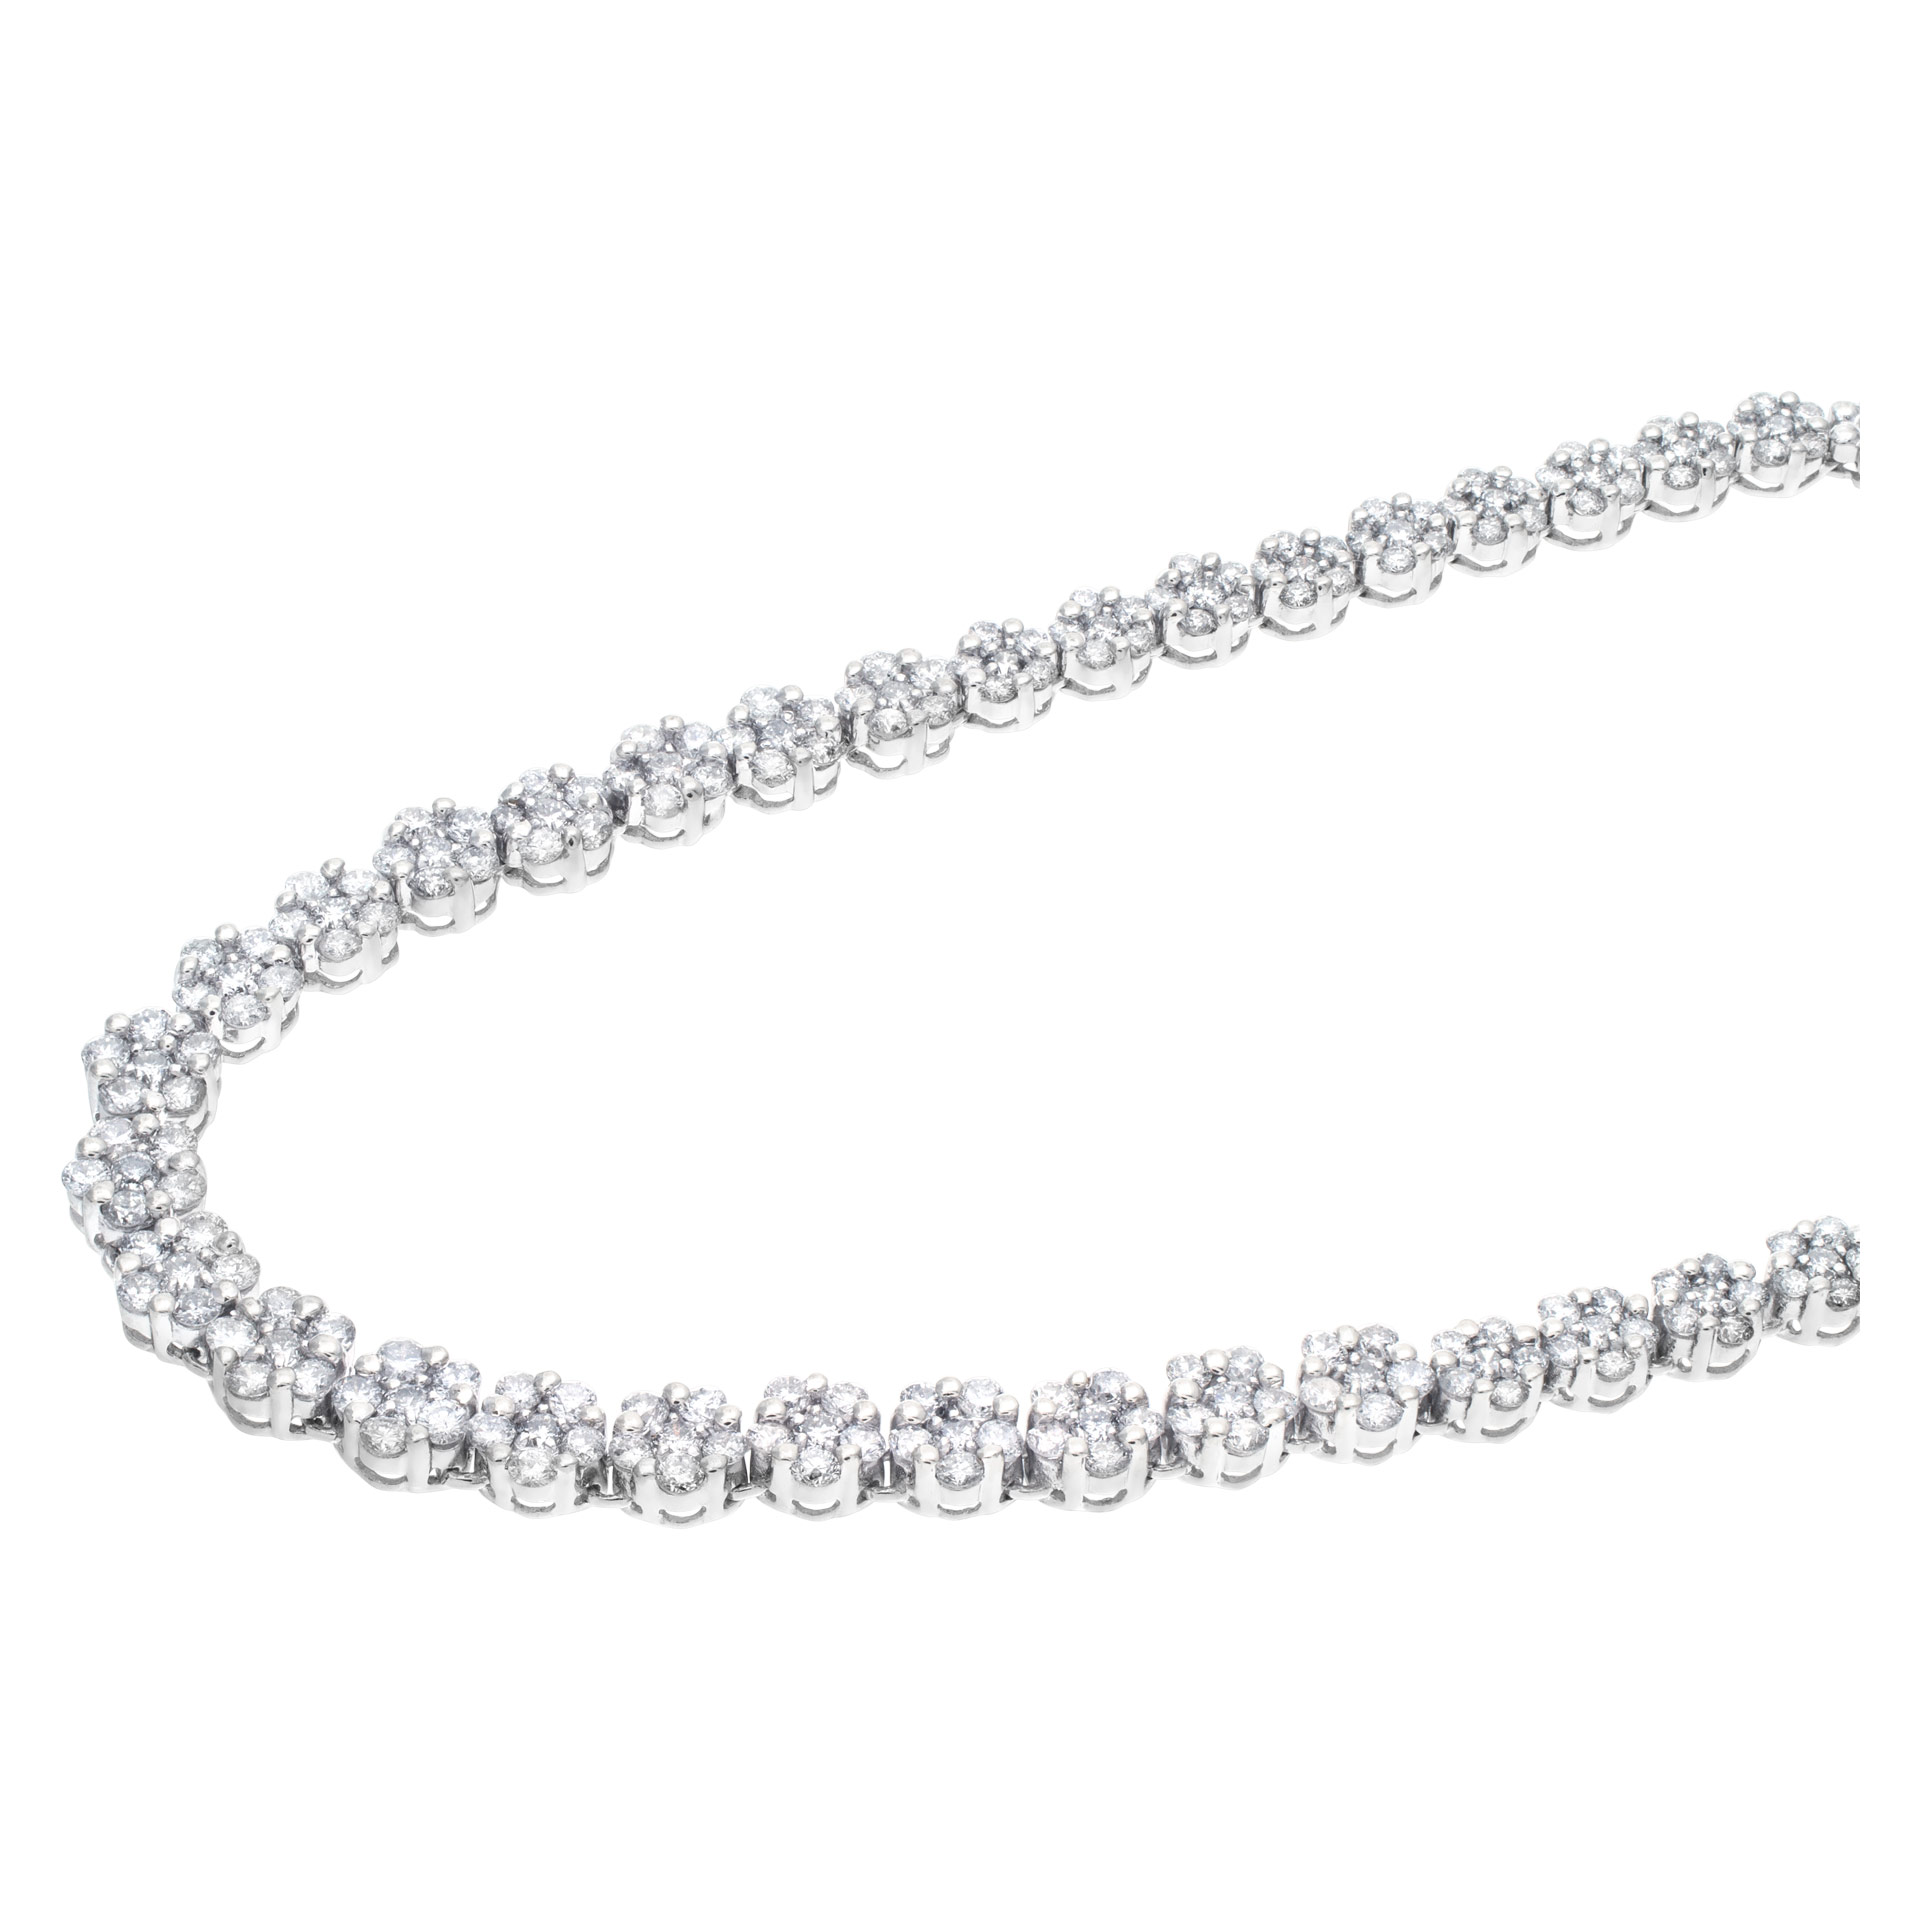 Flower design diamond necklace in 14k white gold. 4.00cts in round brilliant dia's image 4